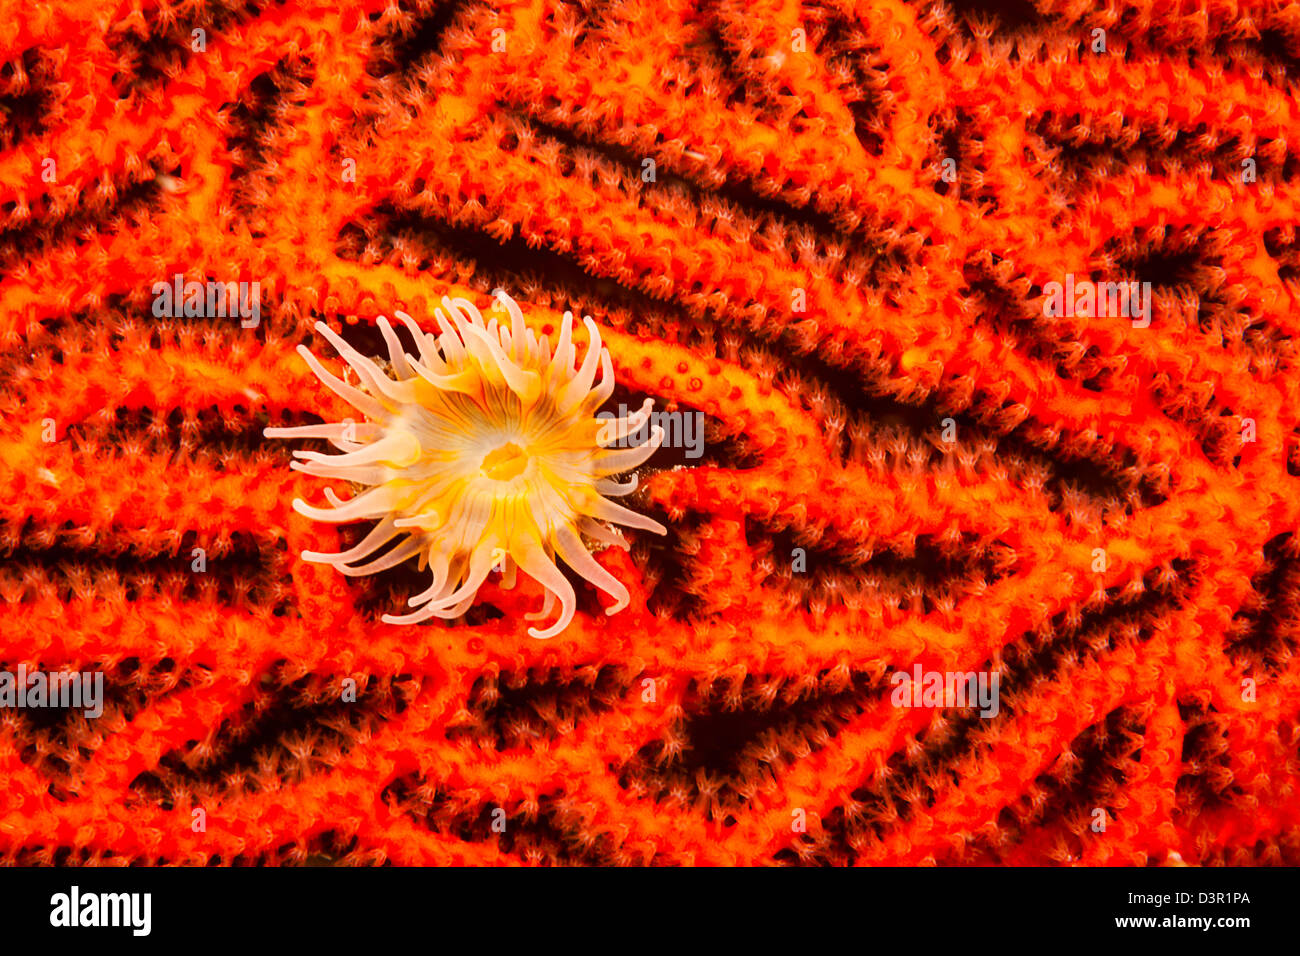 This gorgonian anemone, Nemanthus nitidus, also called a gorgonian wrapper, was photographed at night on a gorgonian fan, Fiji. Stock Photo